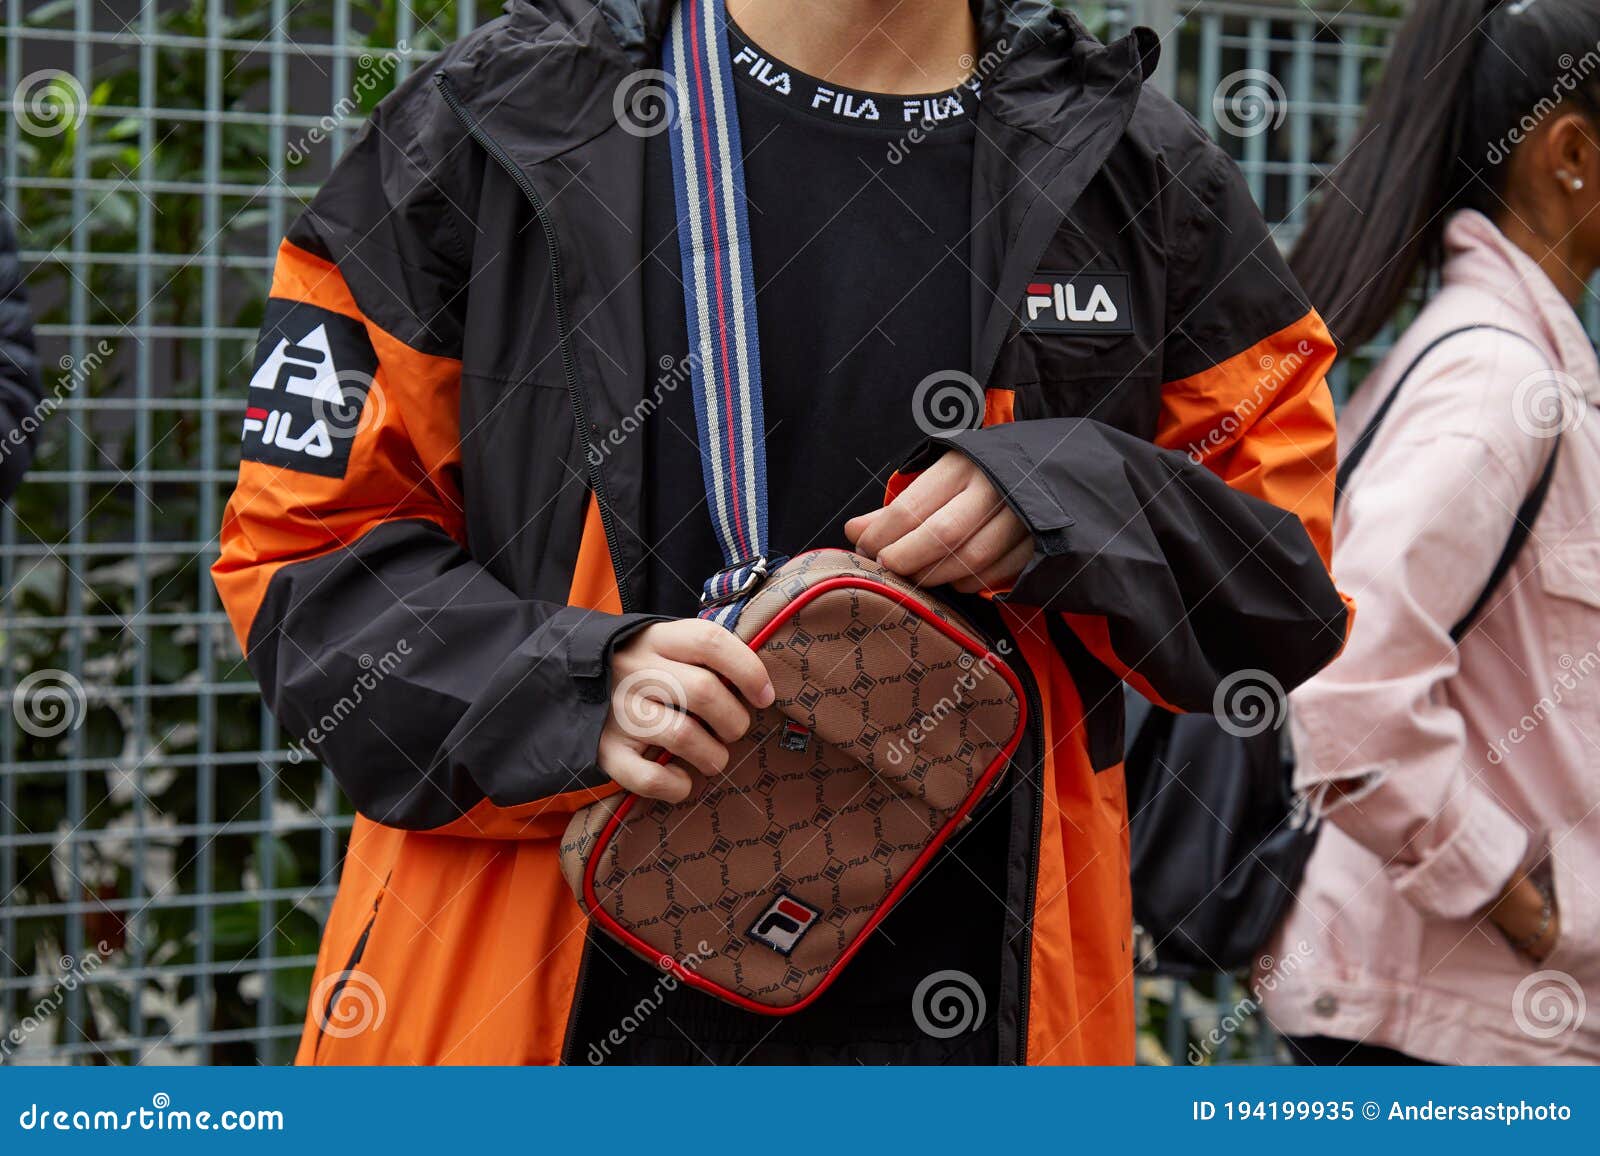 Man with and Orange Fila Jacket and Brown and Red Bag before Fila Fashion Show, Milan Editorial - Image of color, style: 194199935